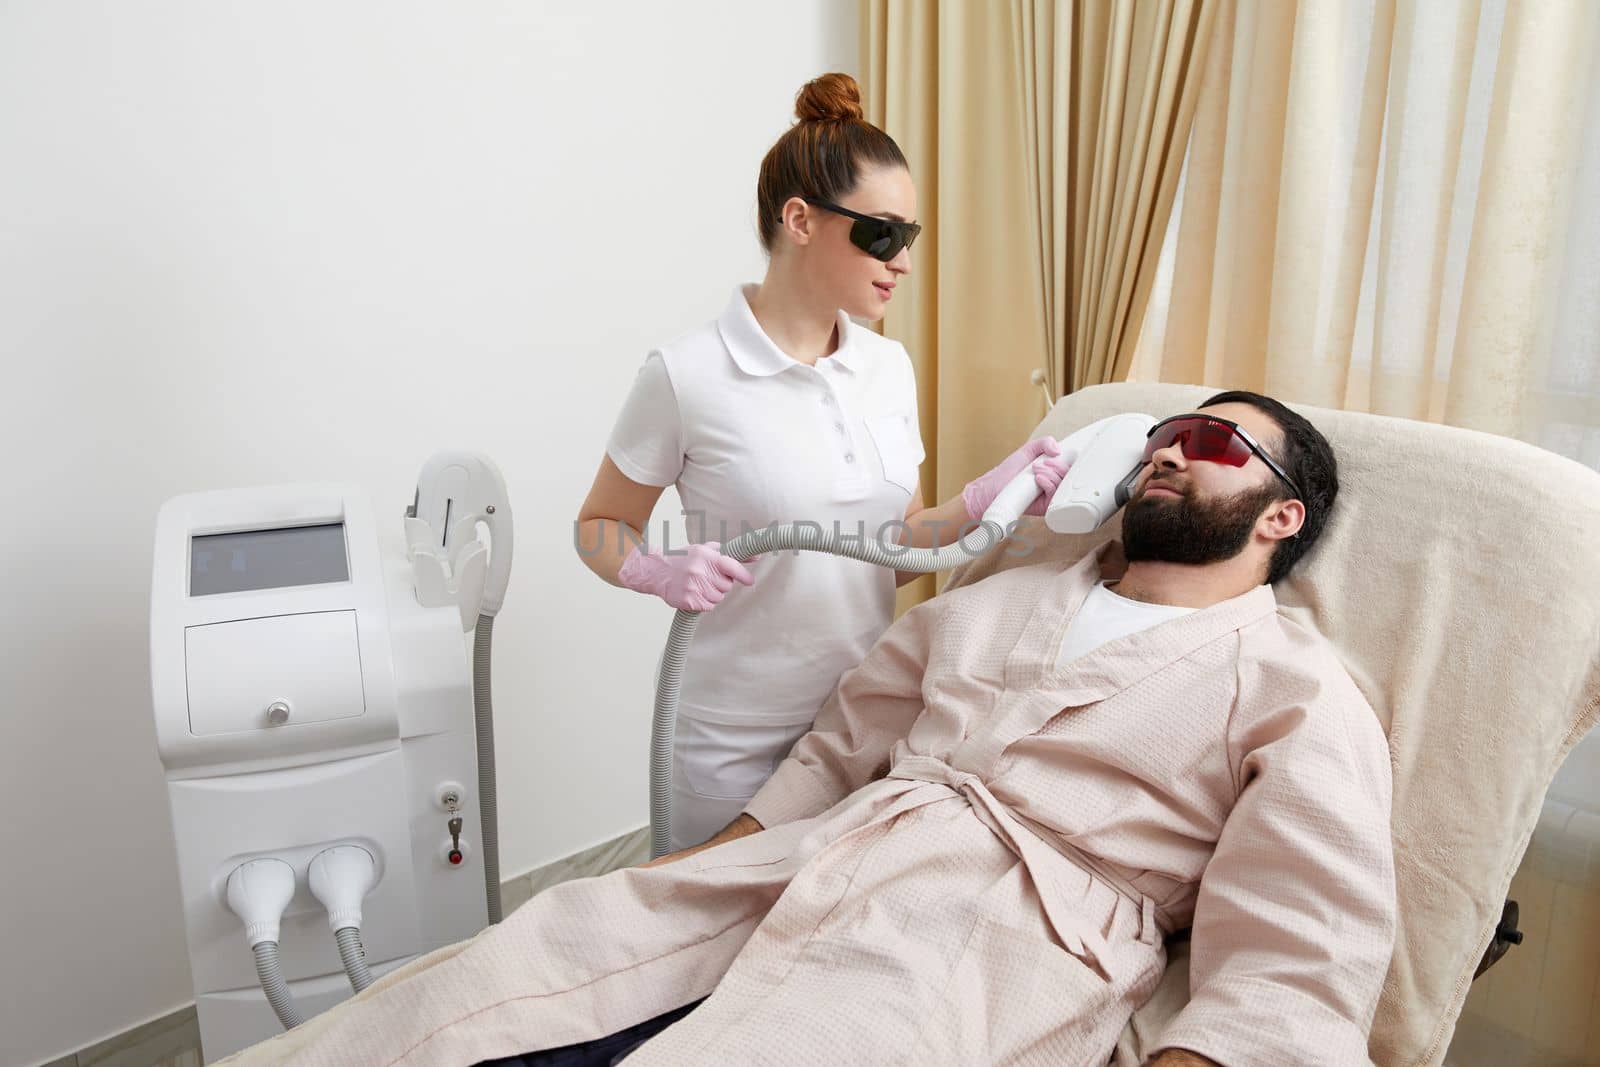 Bearded man getting laser facial treatment by professional cosmetologist in a beauty clinic. Healthy man lifestyle concept